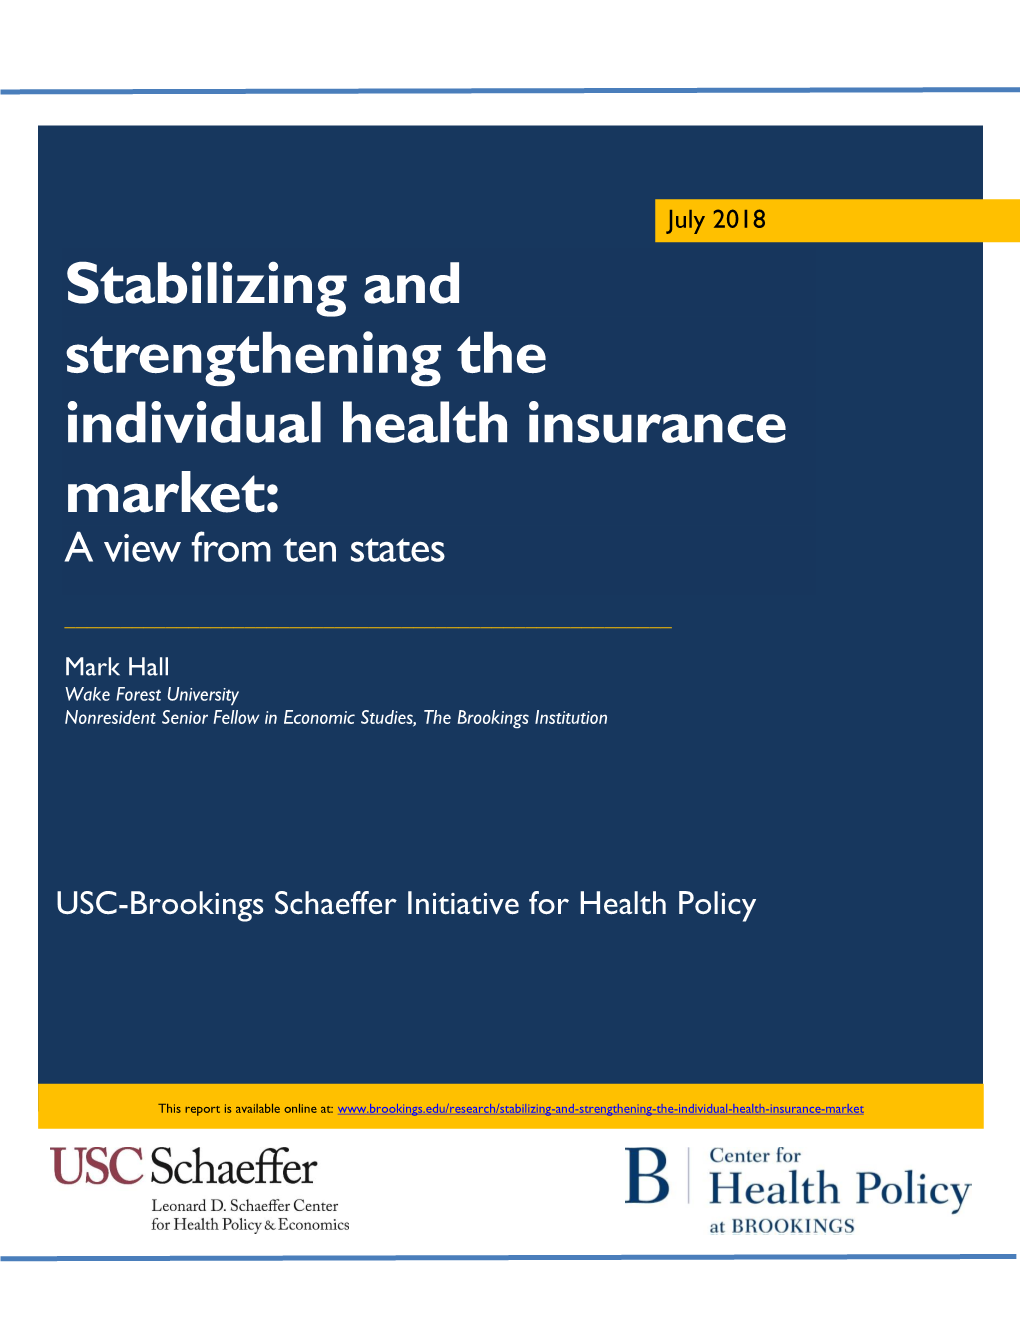 Stabilizing and Strengthening the Individual Health Insurance Market: a View from Ten States